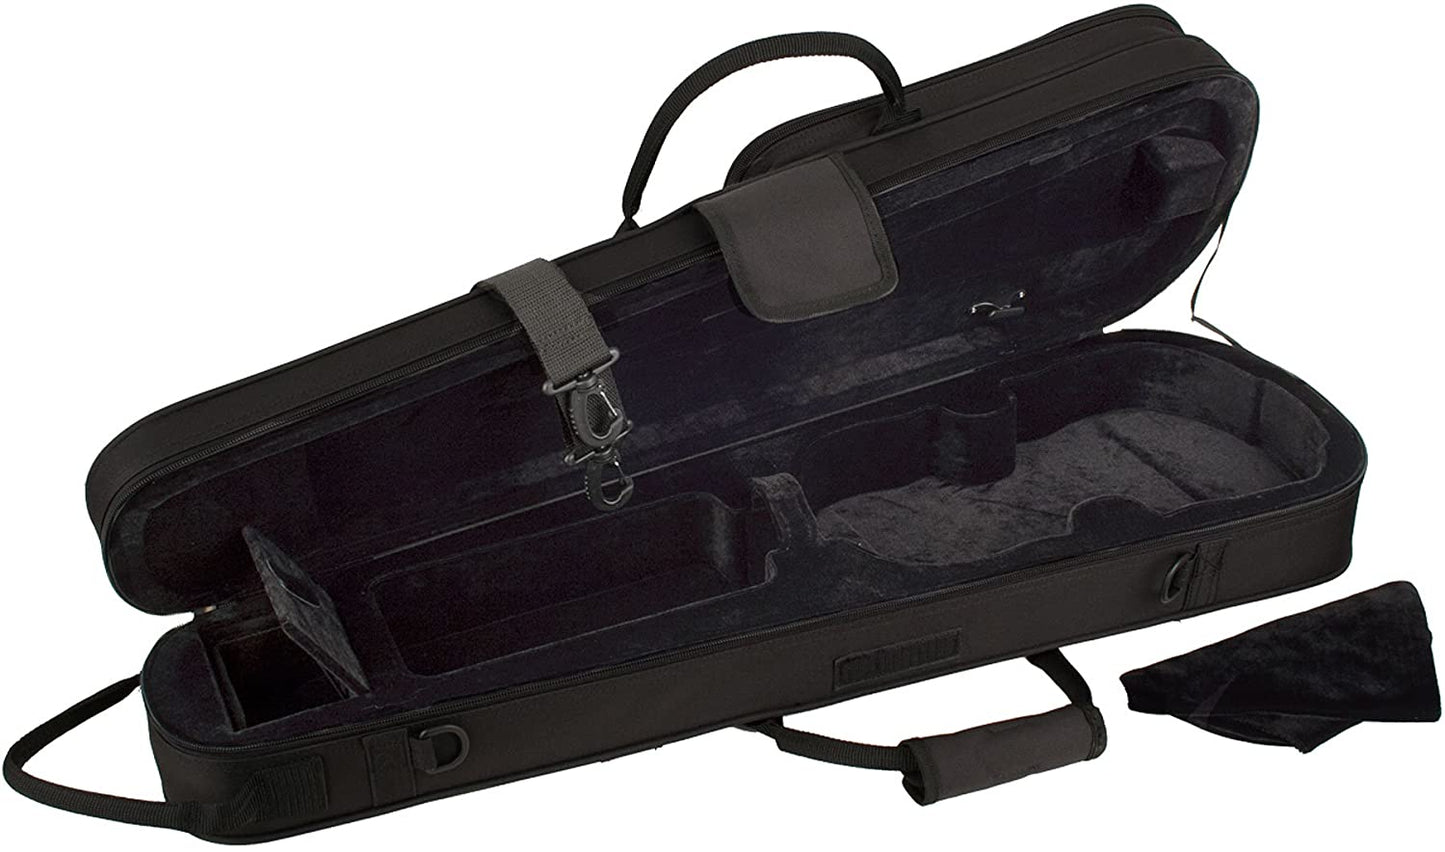 Protec MX015 Viola MAX Shaped Case, Fits Violas 15 to 15.5" In Body Length